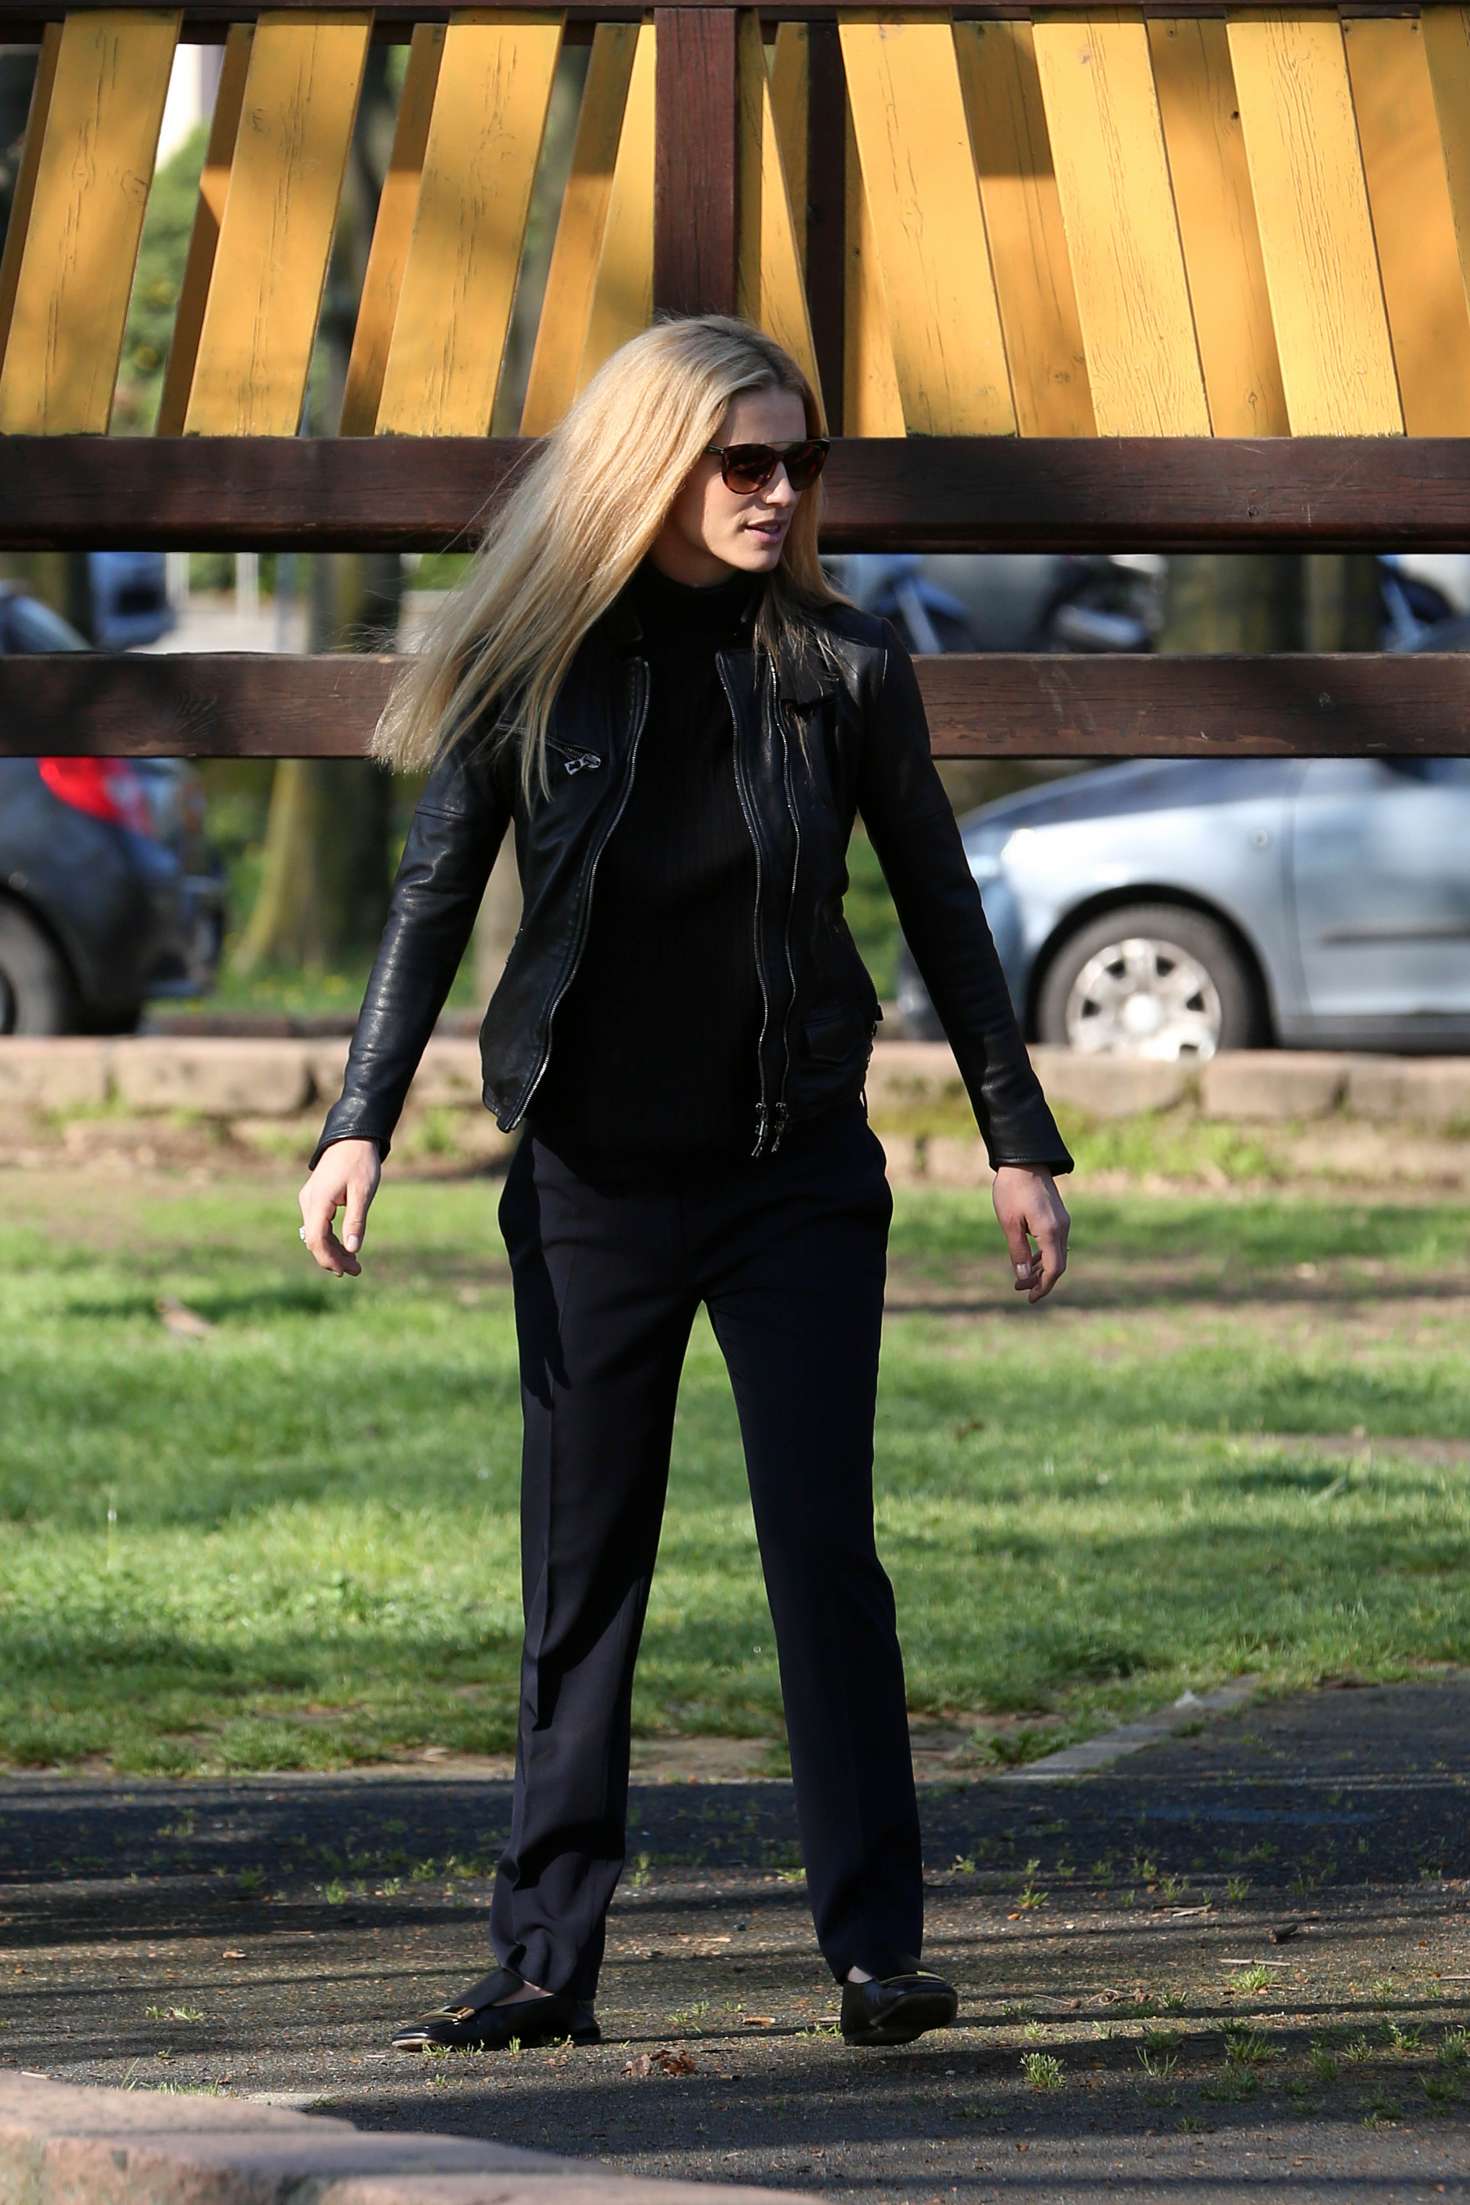 Michelle Hunziker at the park in Milan